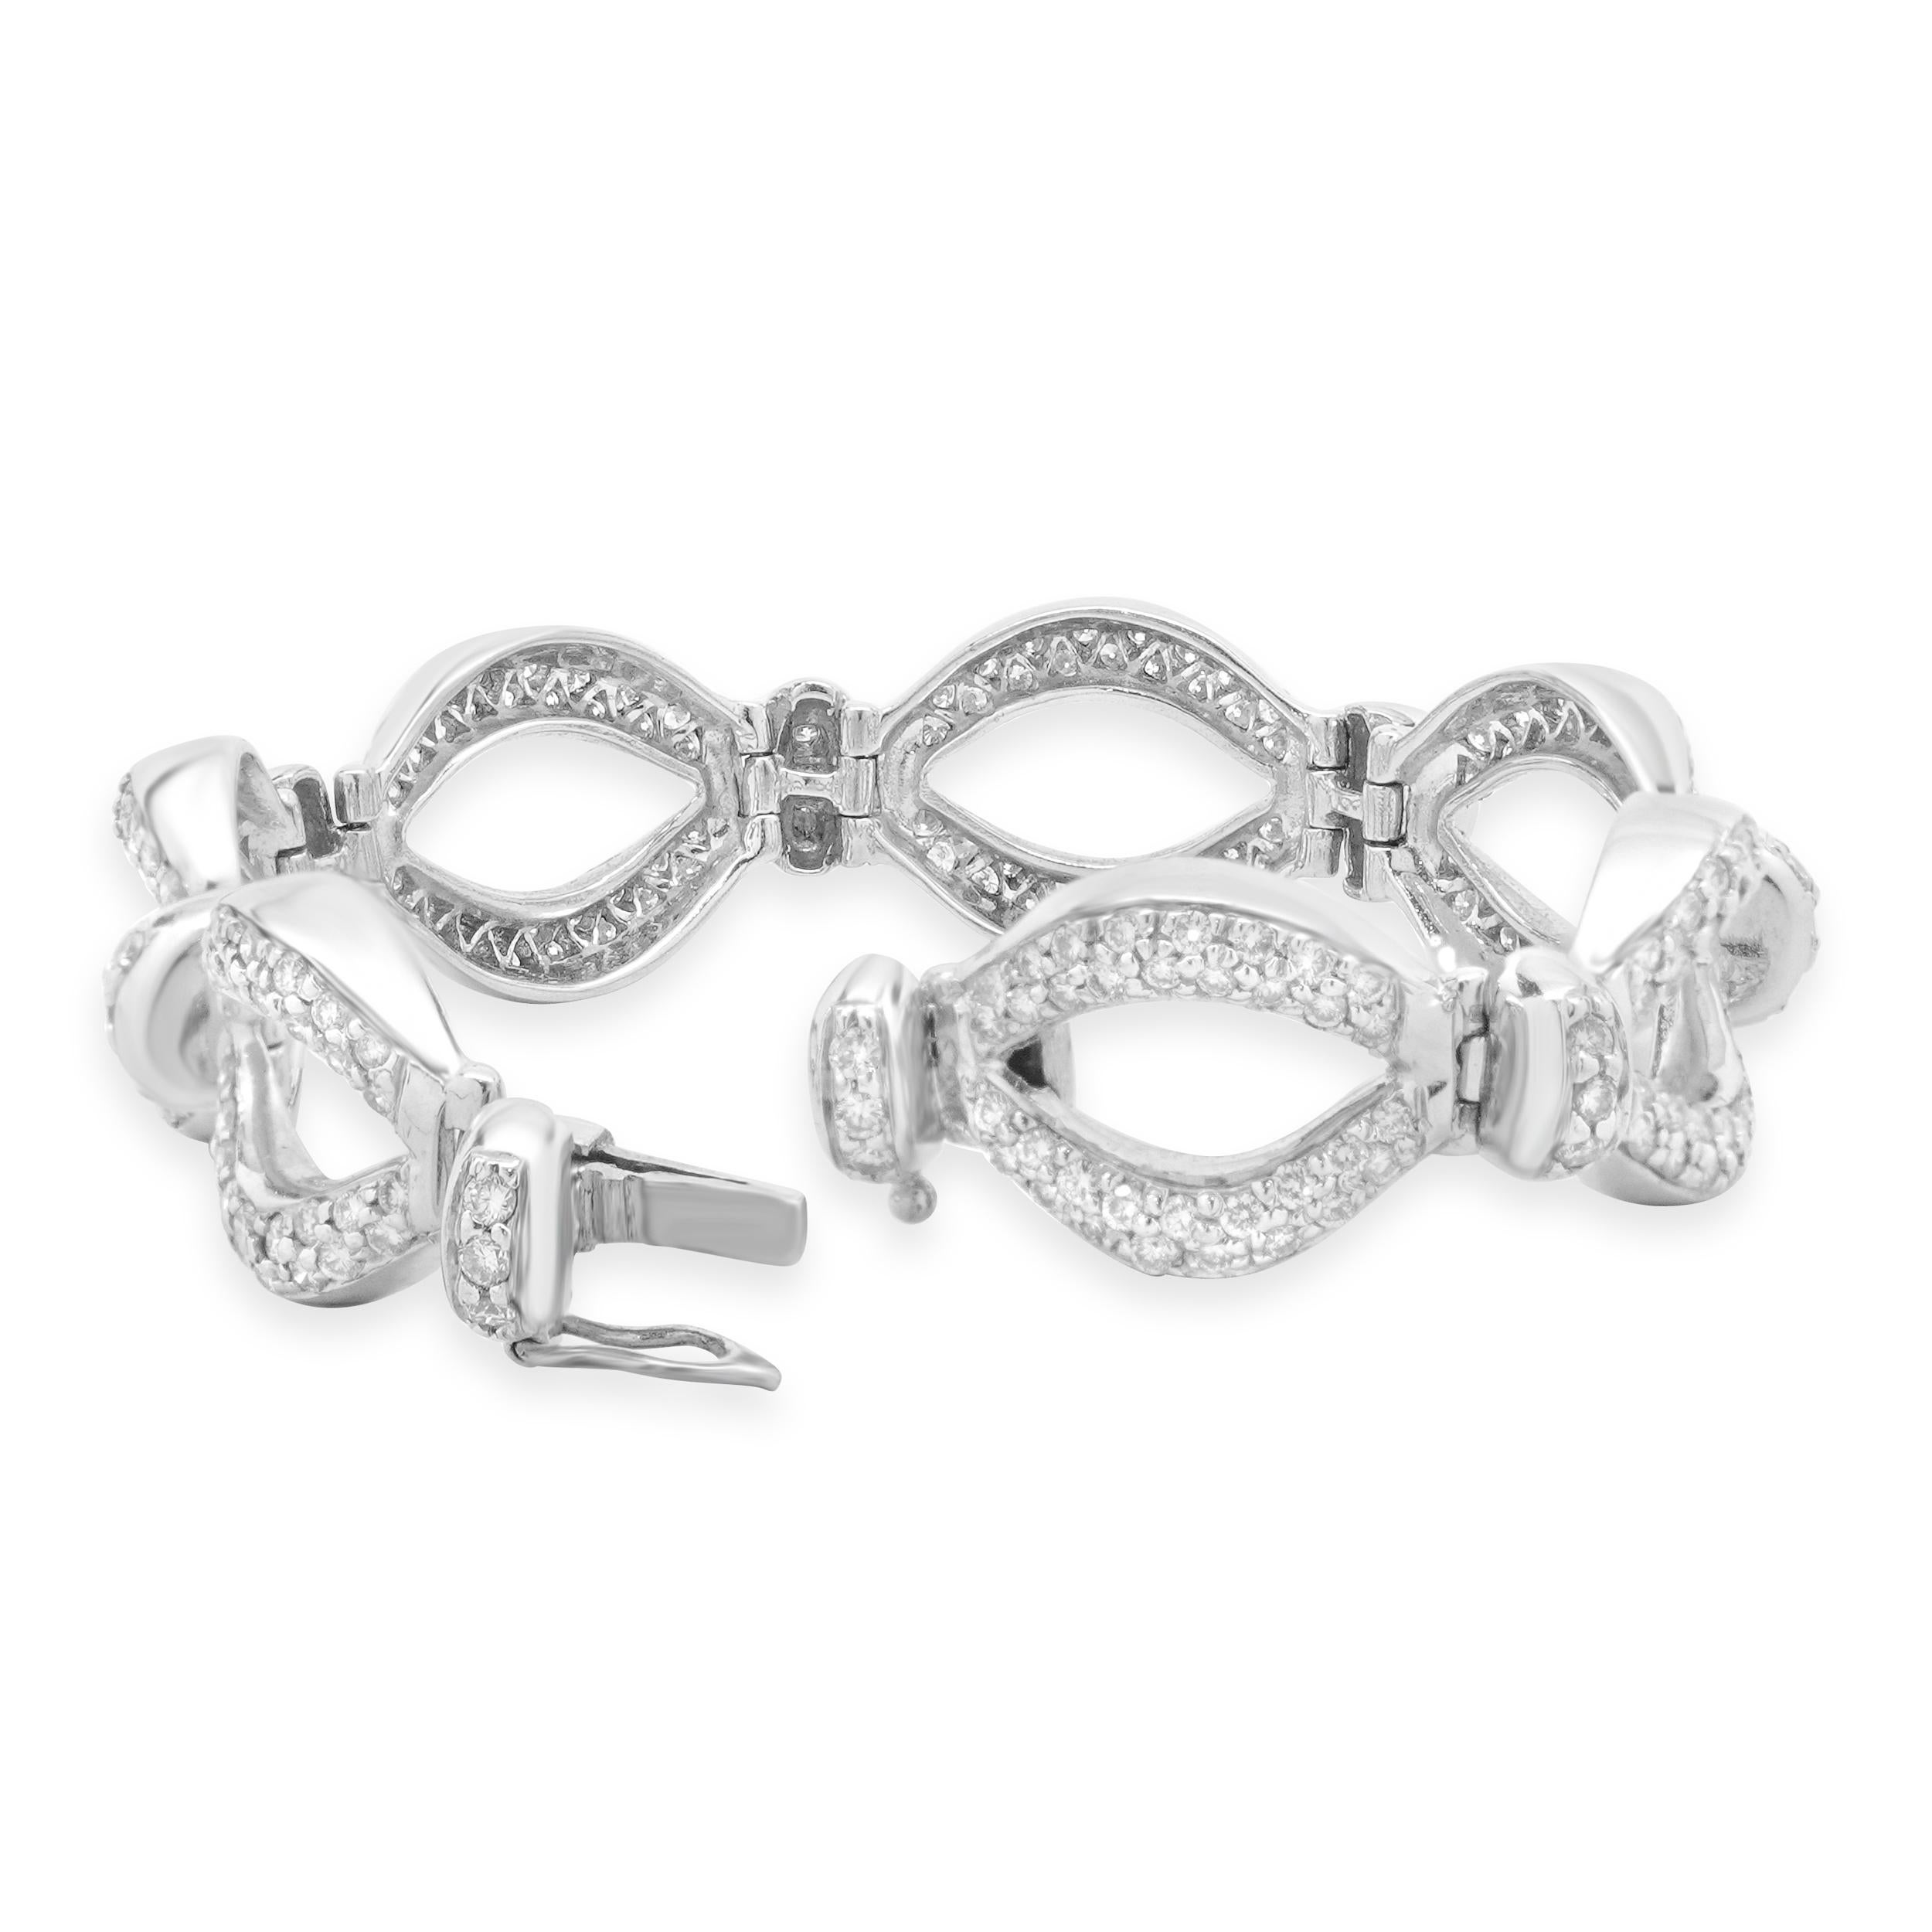 18k White Gold Oval Link Diamond Bracelet In Excellent Condition For Sale In Scottsdale, AZ